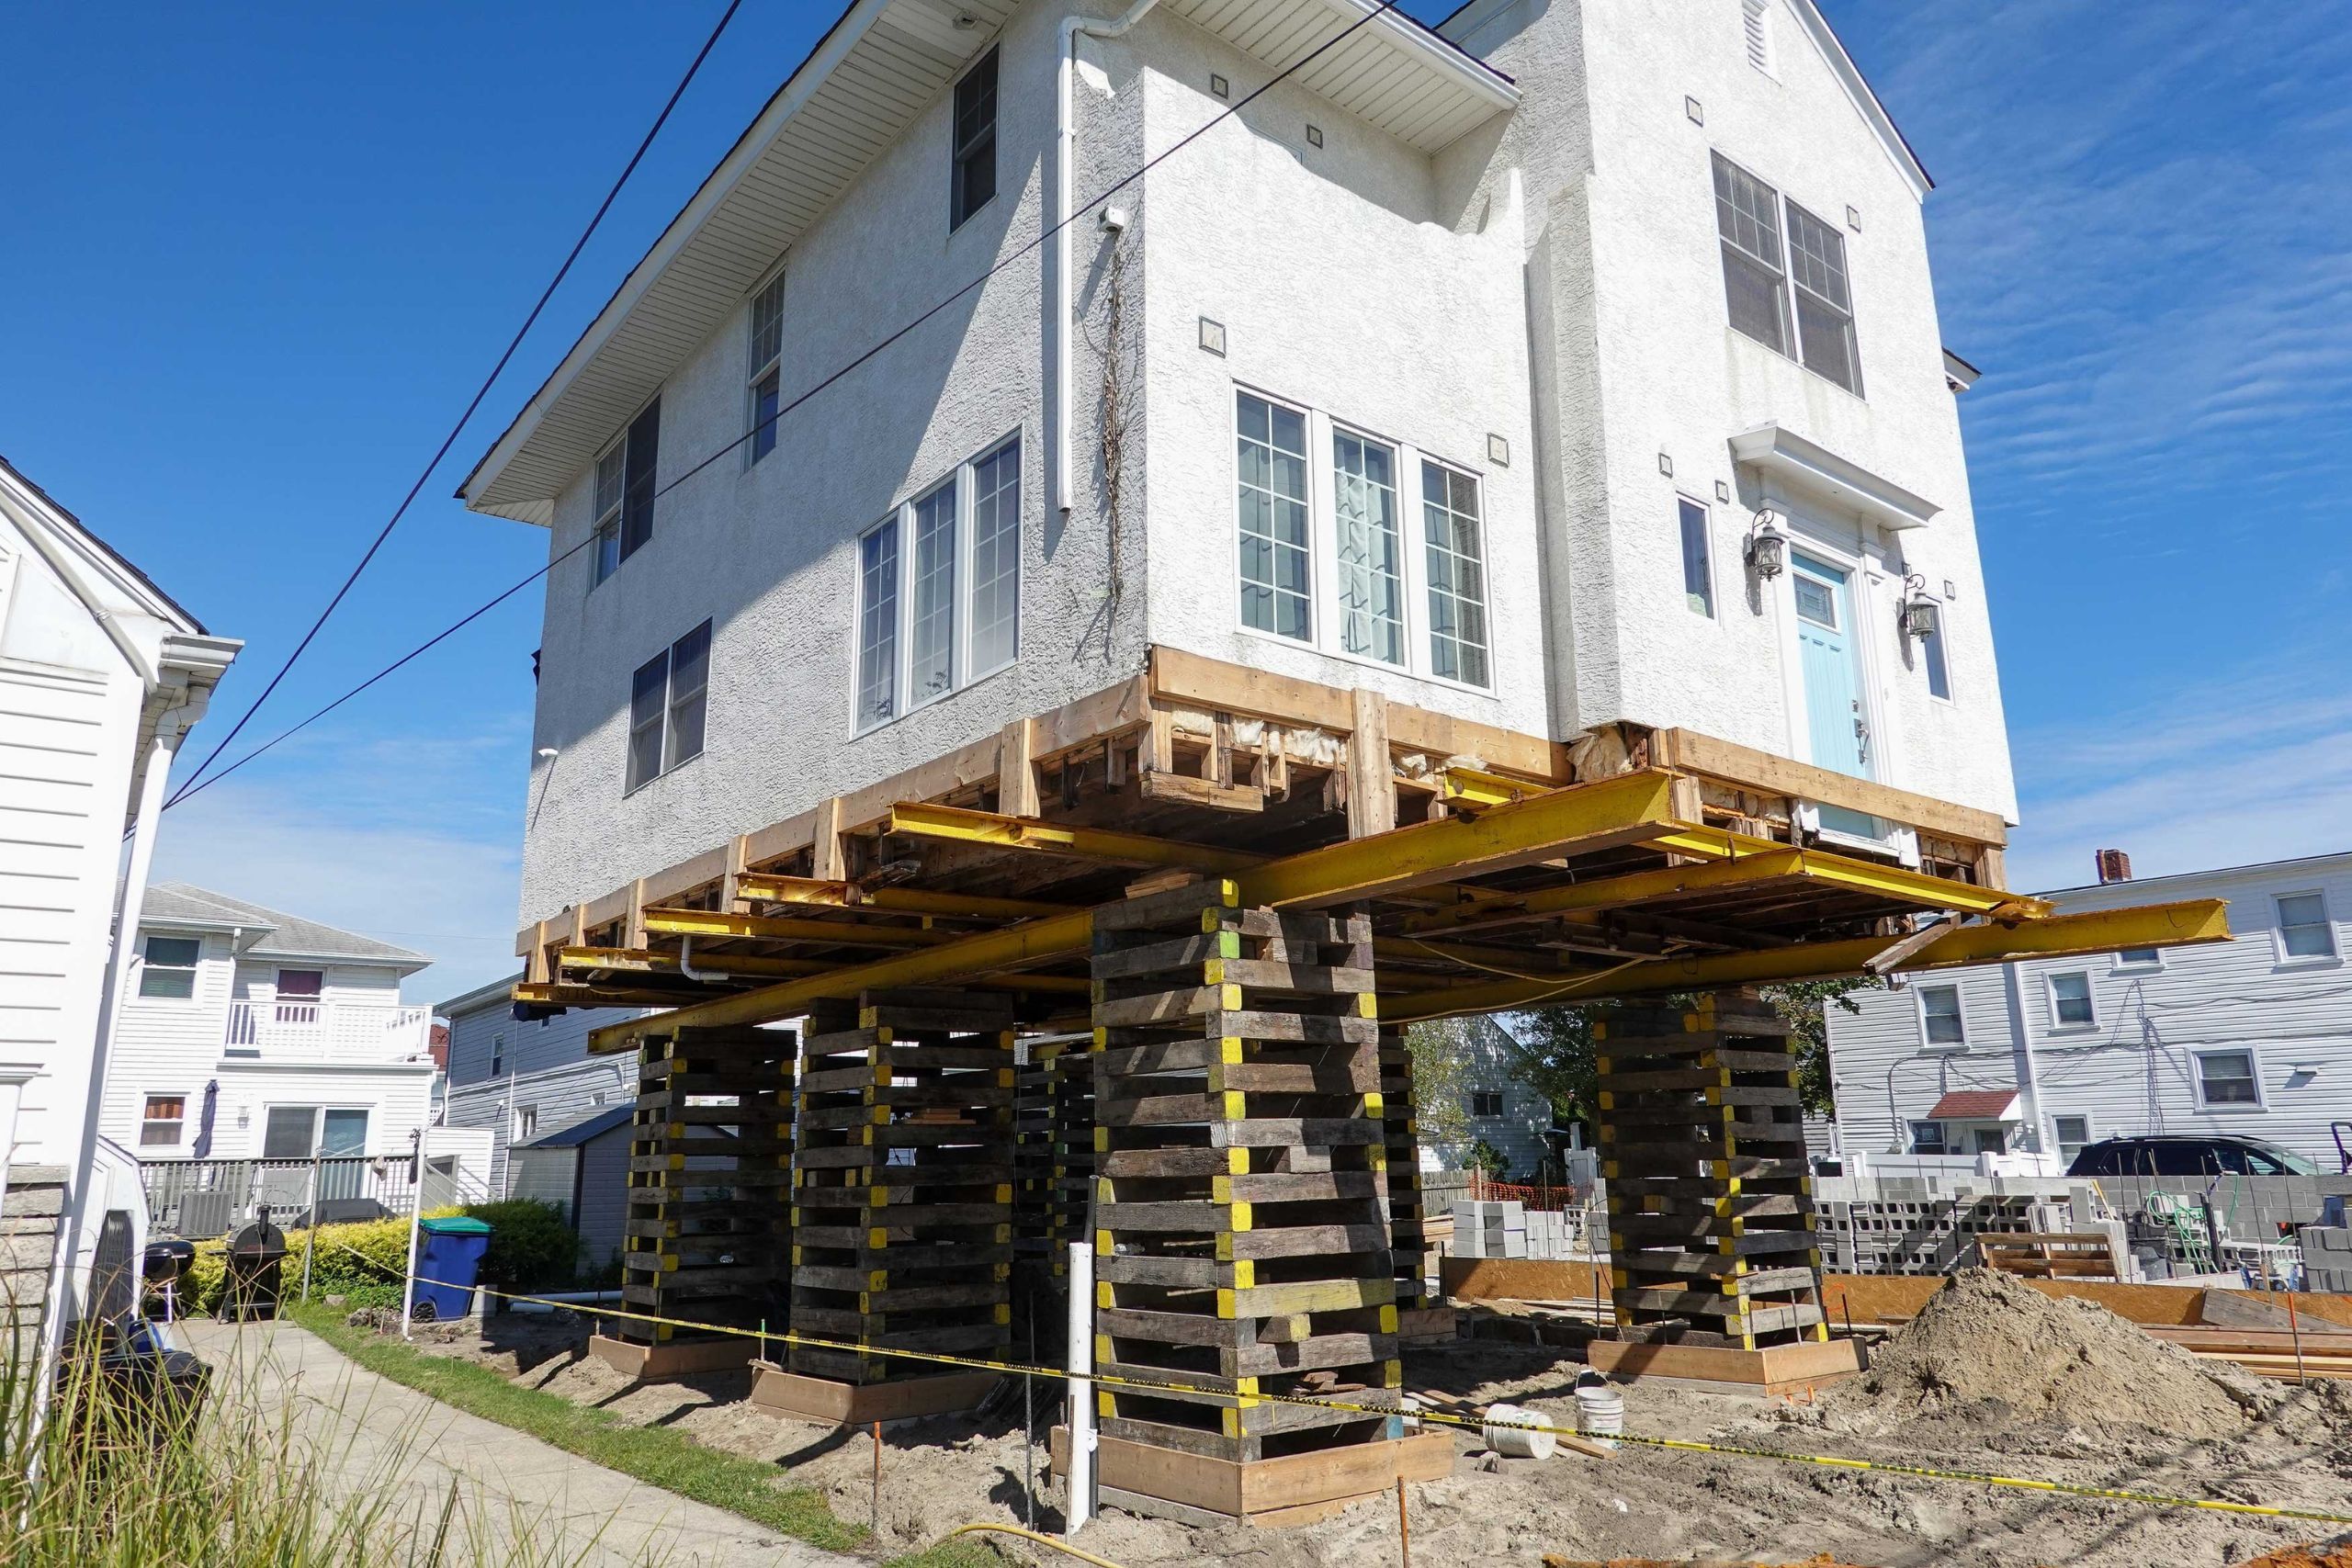 A team of professionals using specialized equipment to raise a house in Newark, preparing it for elevation and renovation